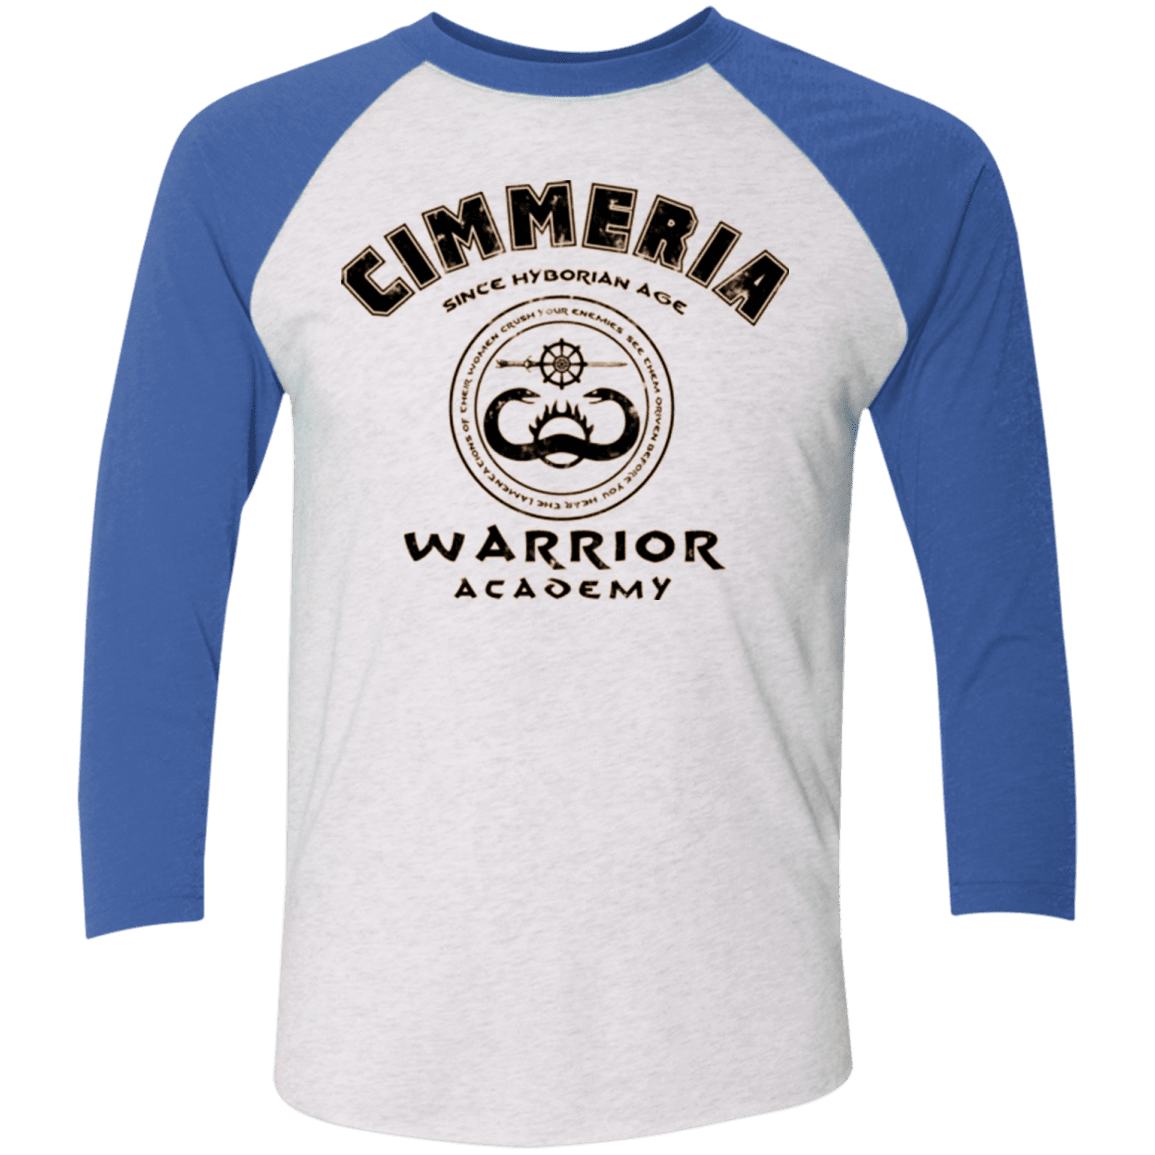 T-Shirts Heather White/Vintage Royal / X-Small Crimmeria Warrior academy Men's Triblend 3/4 Sleeve